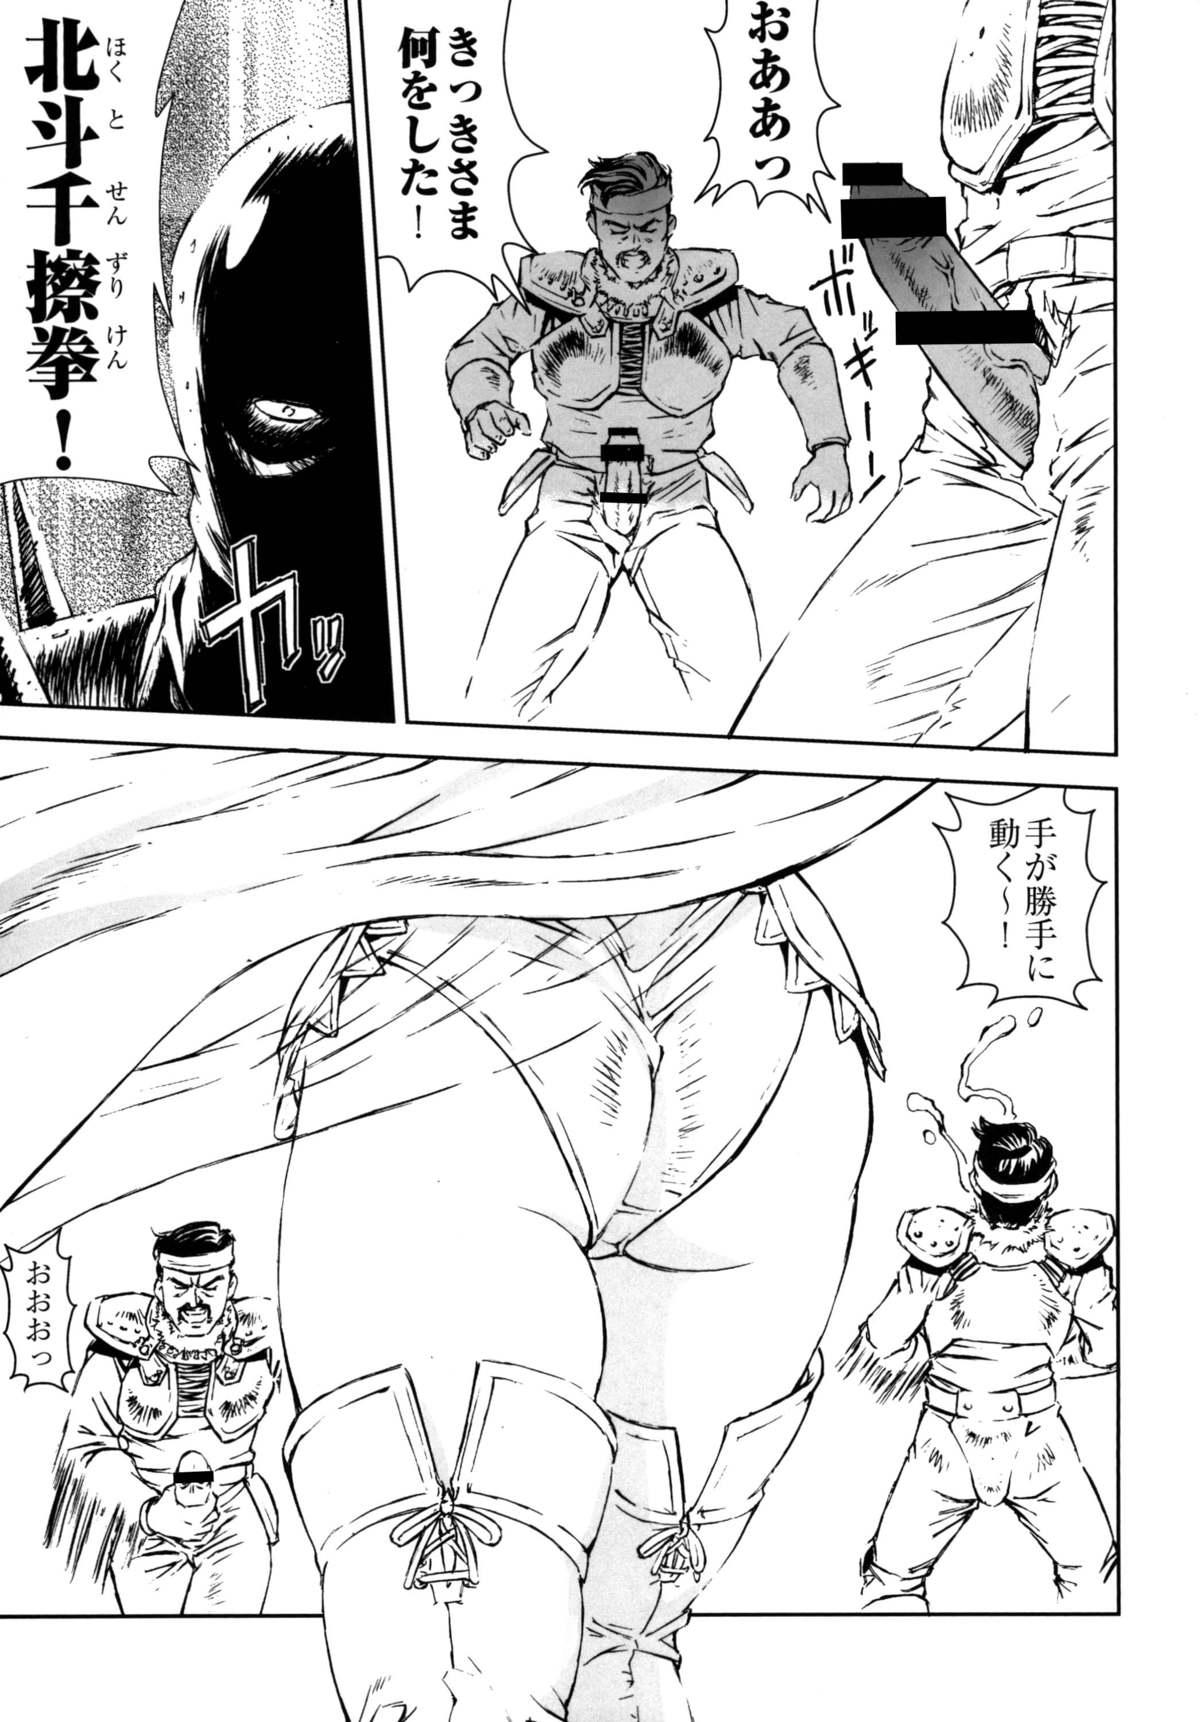 Beurette HOT BITCH JUMP 2 - Kochikame Fist of the north star Nice - Page 6